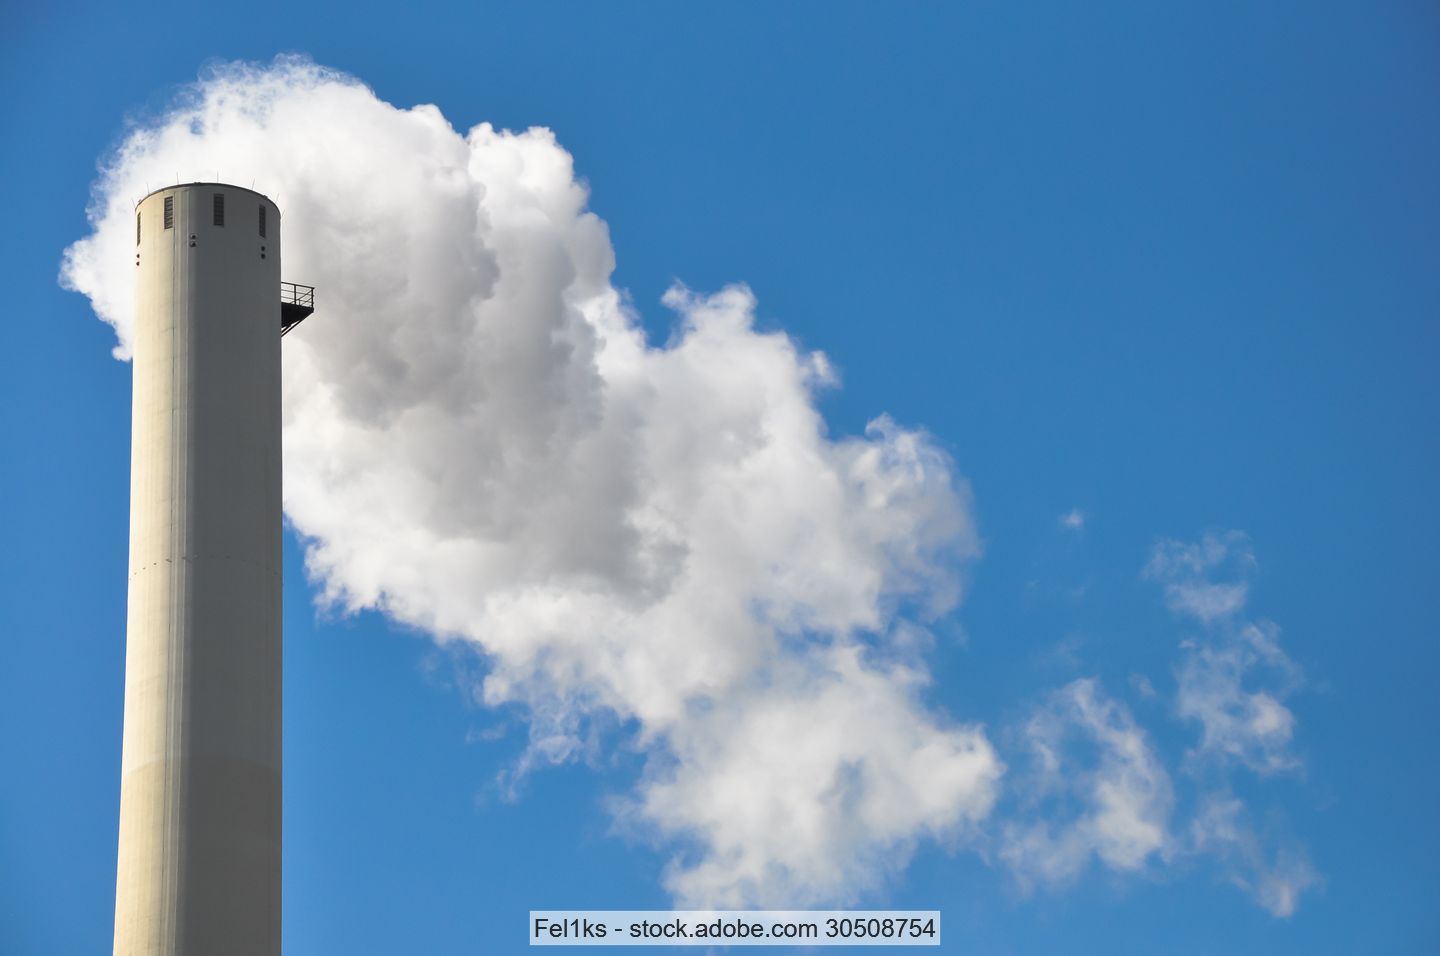 Symbolic image: photo of a stack with a steam plume seen against the sky.